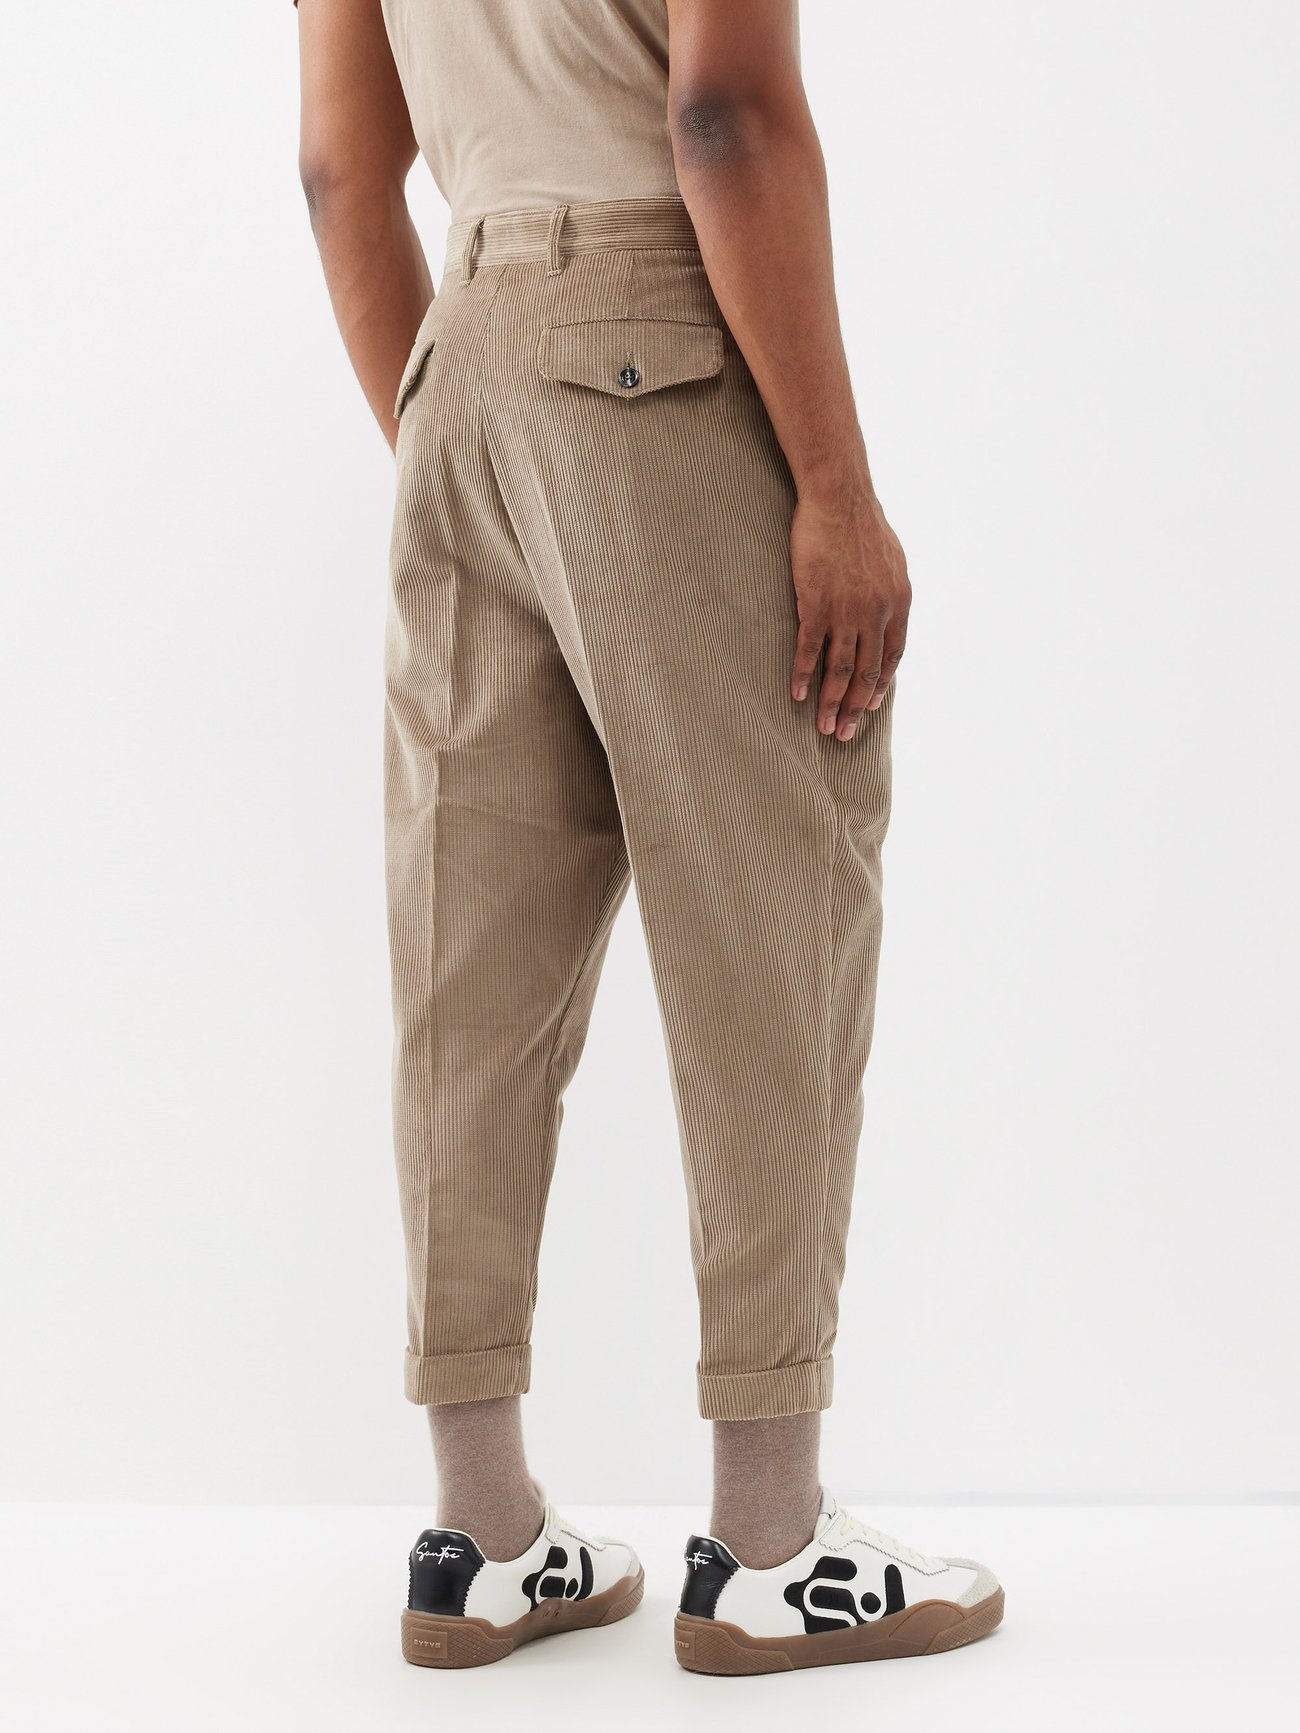 Gray Carrot-Fit Trousers by AMI Paris on Sale